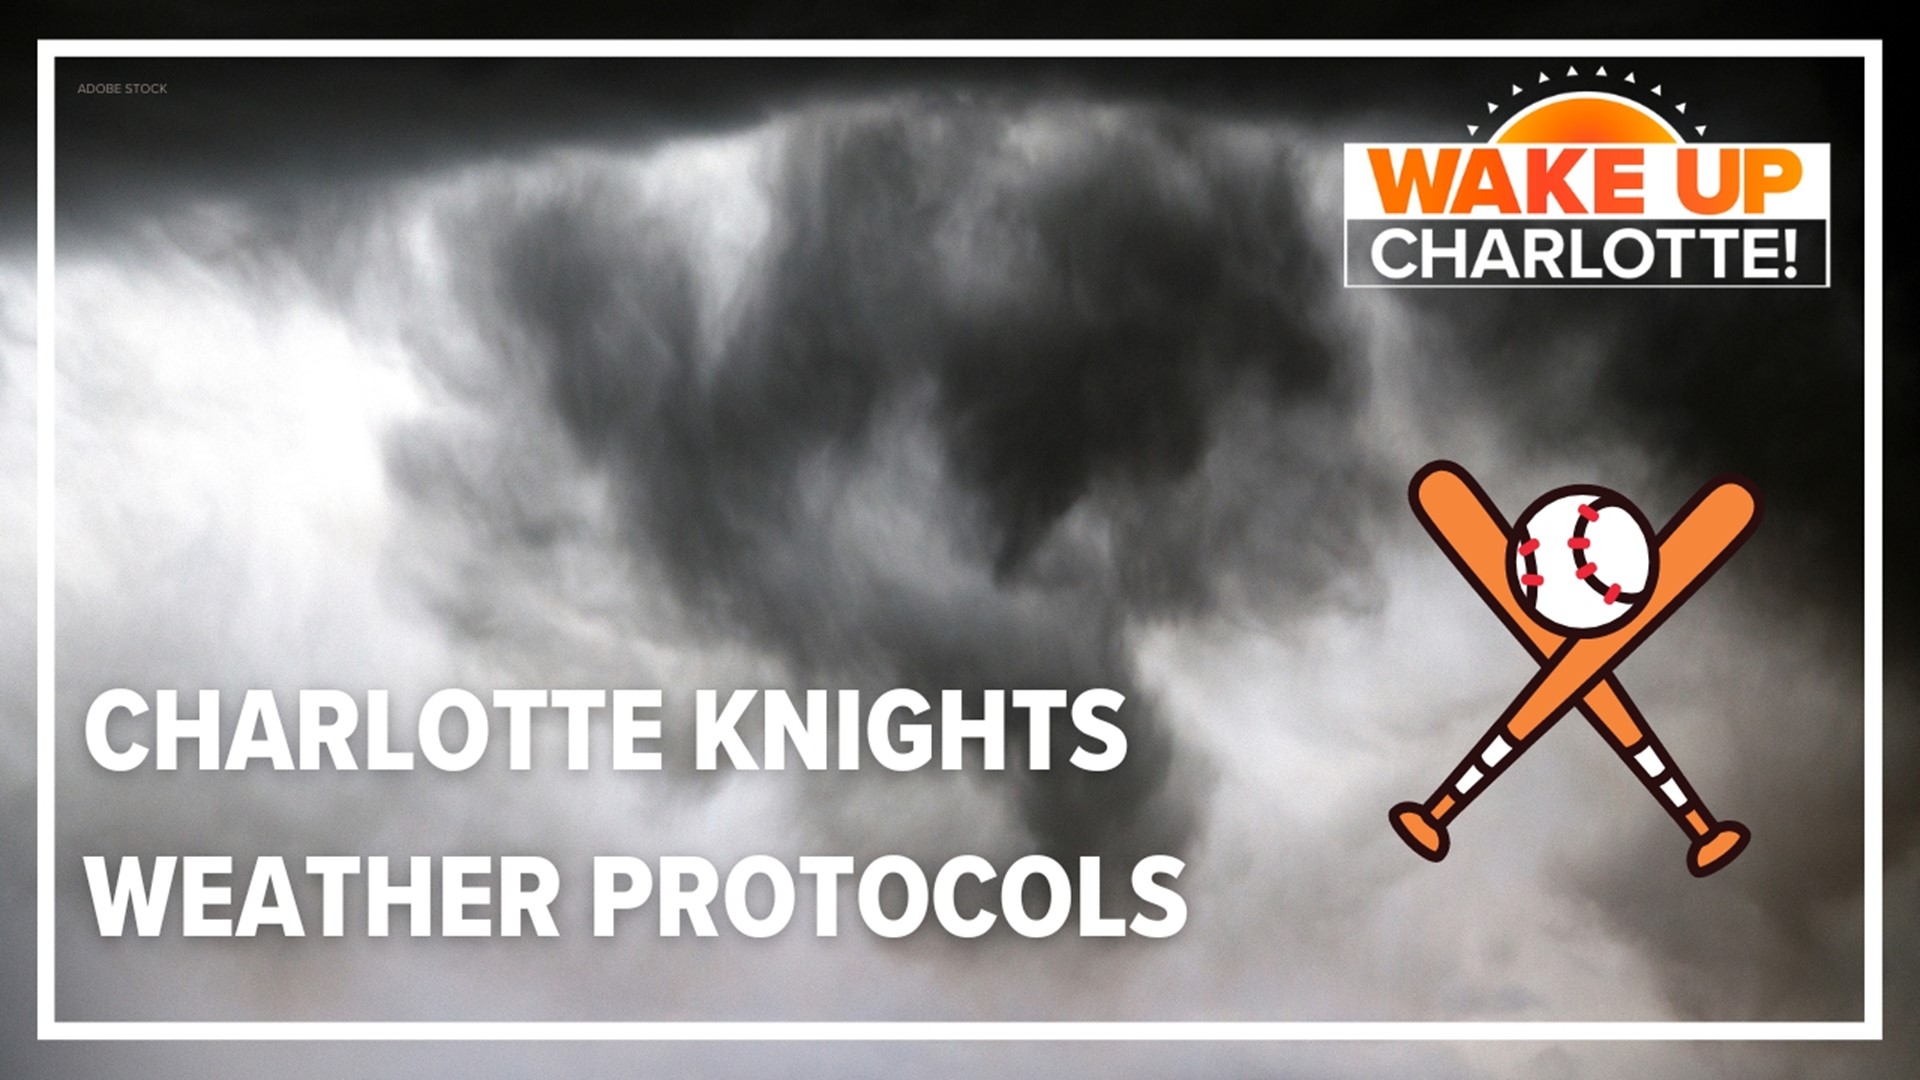 KJ Jacobs shares with us the inclement weather policy the Charlotte Knights have in place.